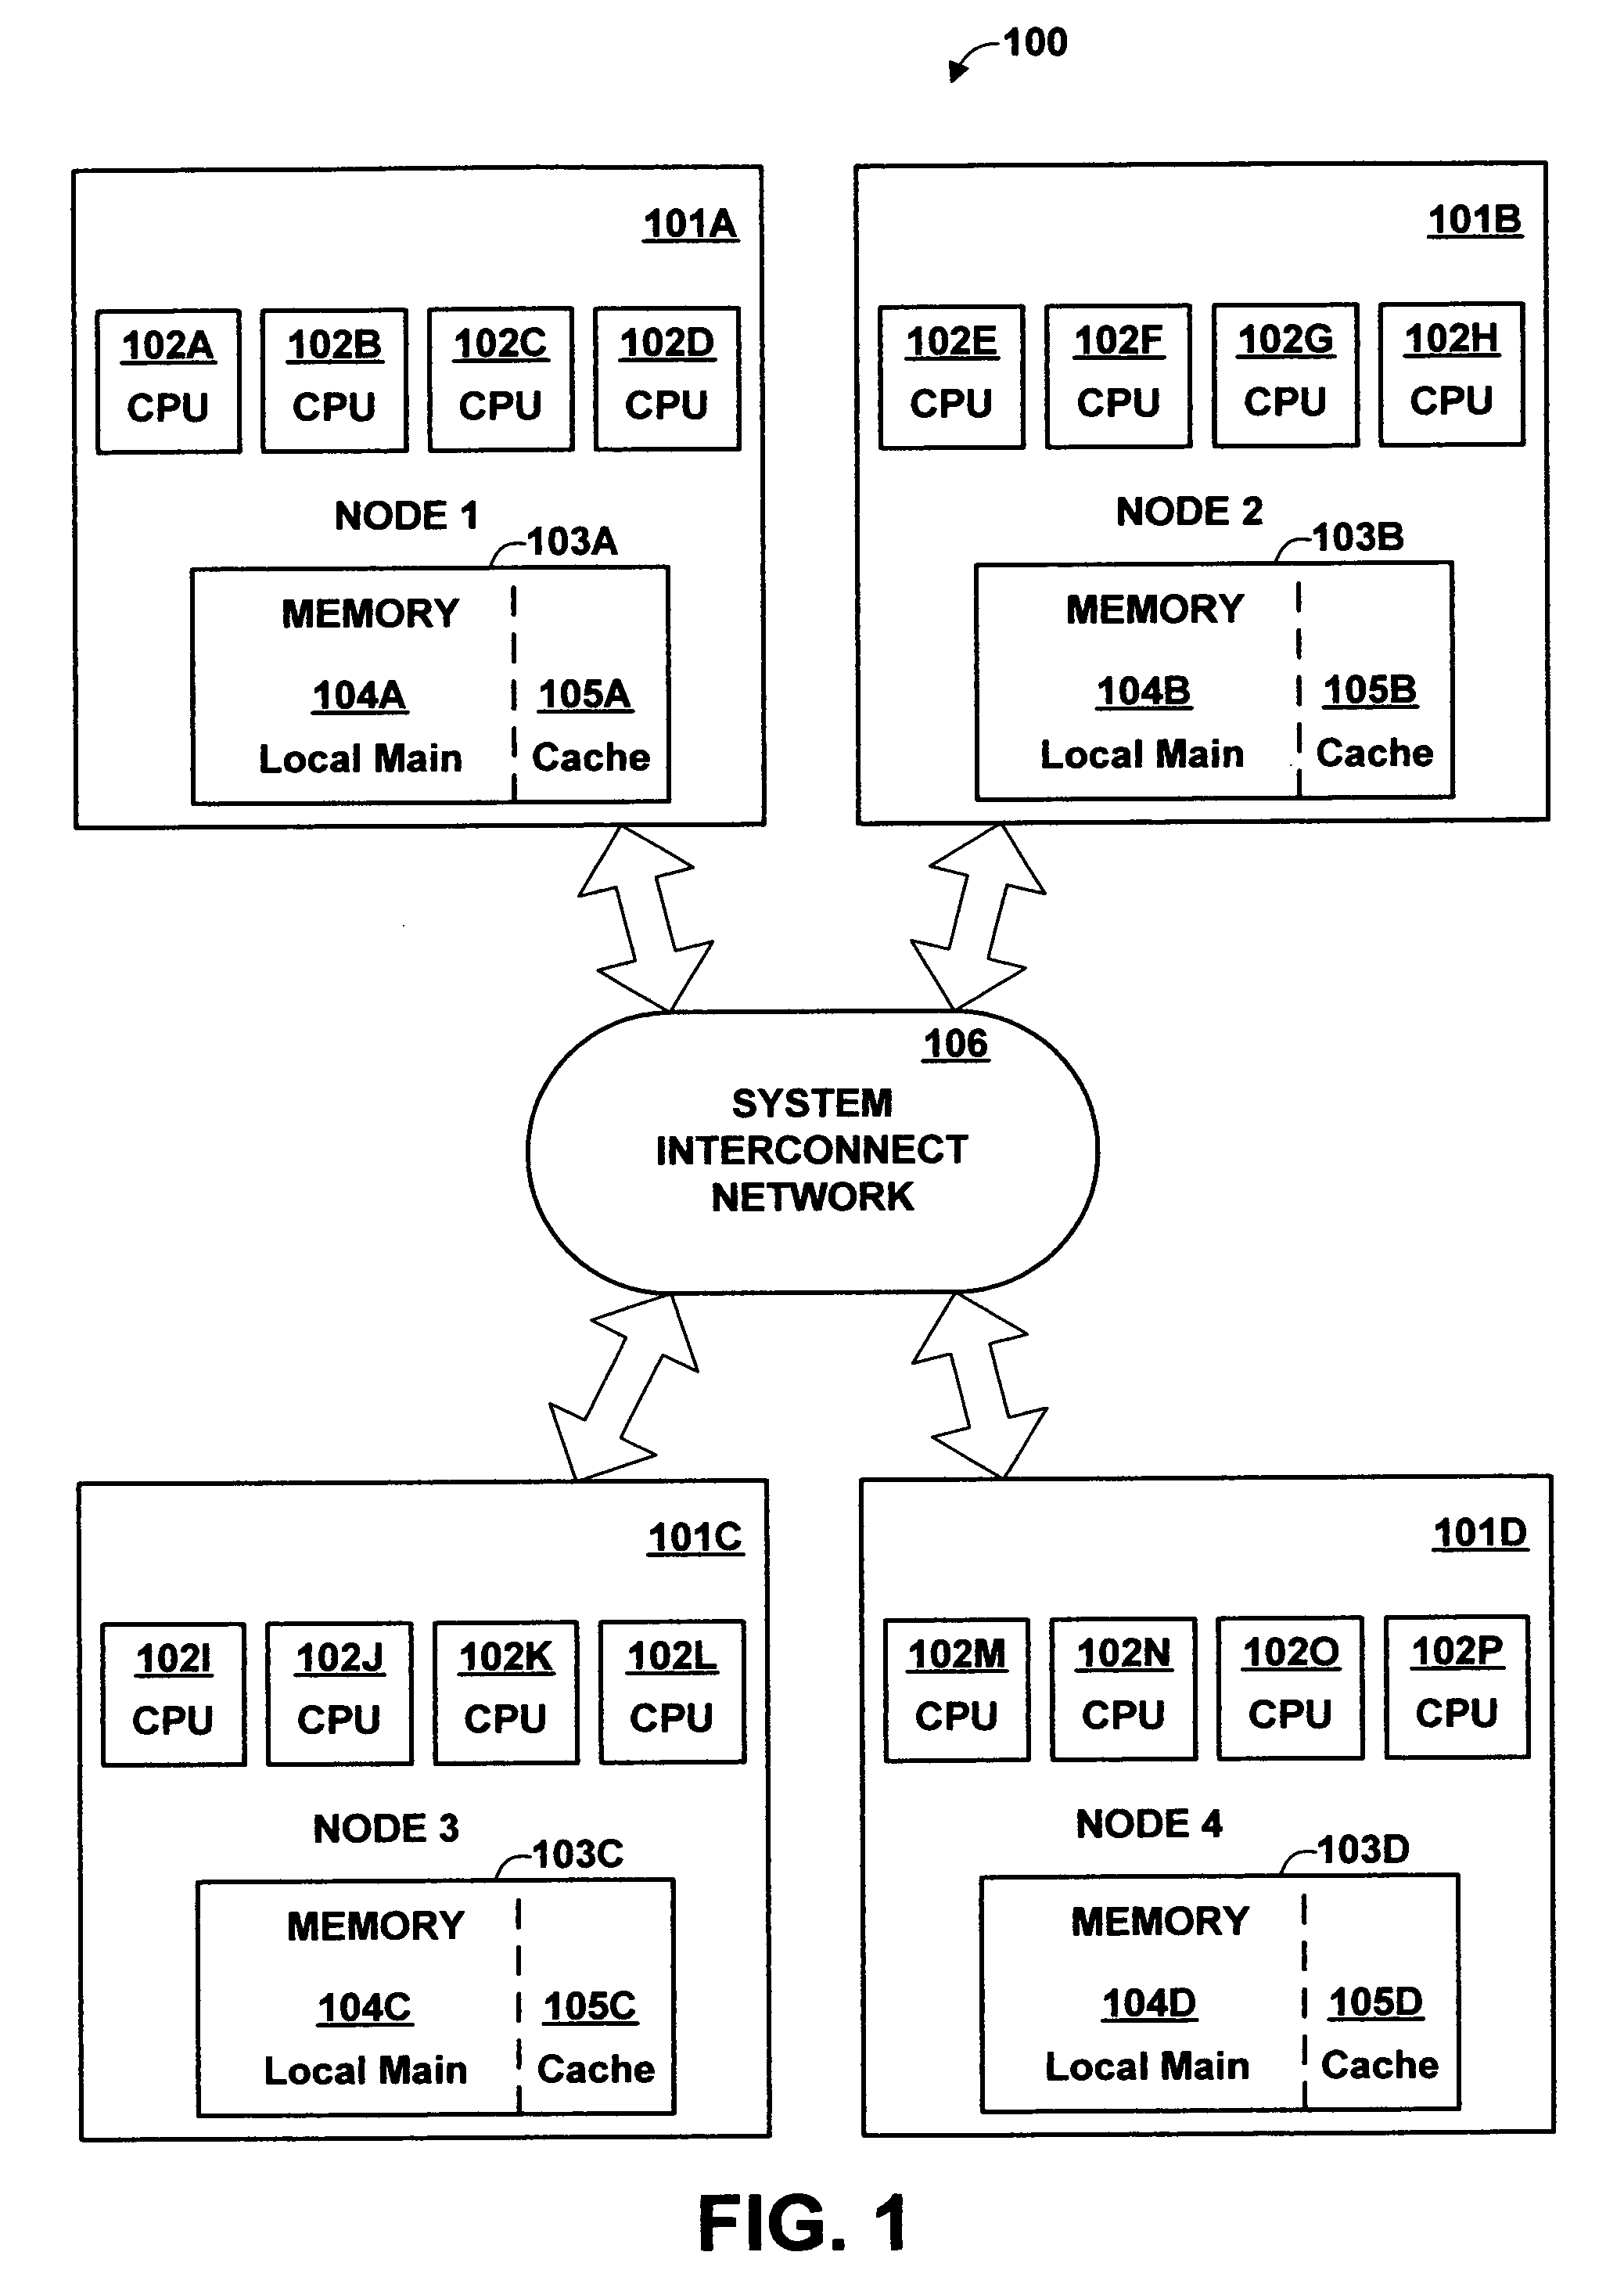 Method and apparatus for monitoring processes in a non-uniform memory access (NUMA) computer system